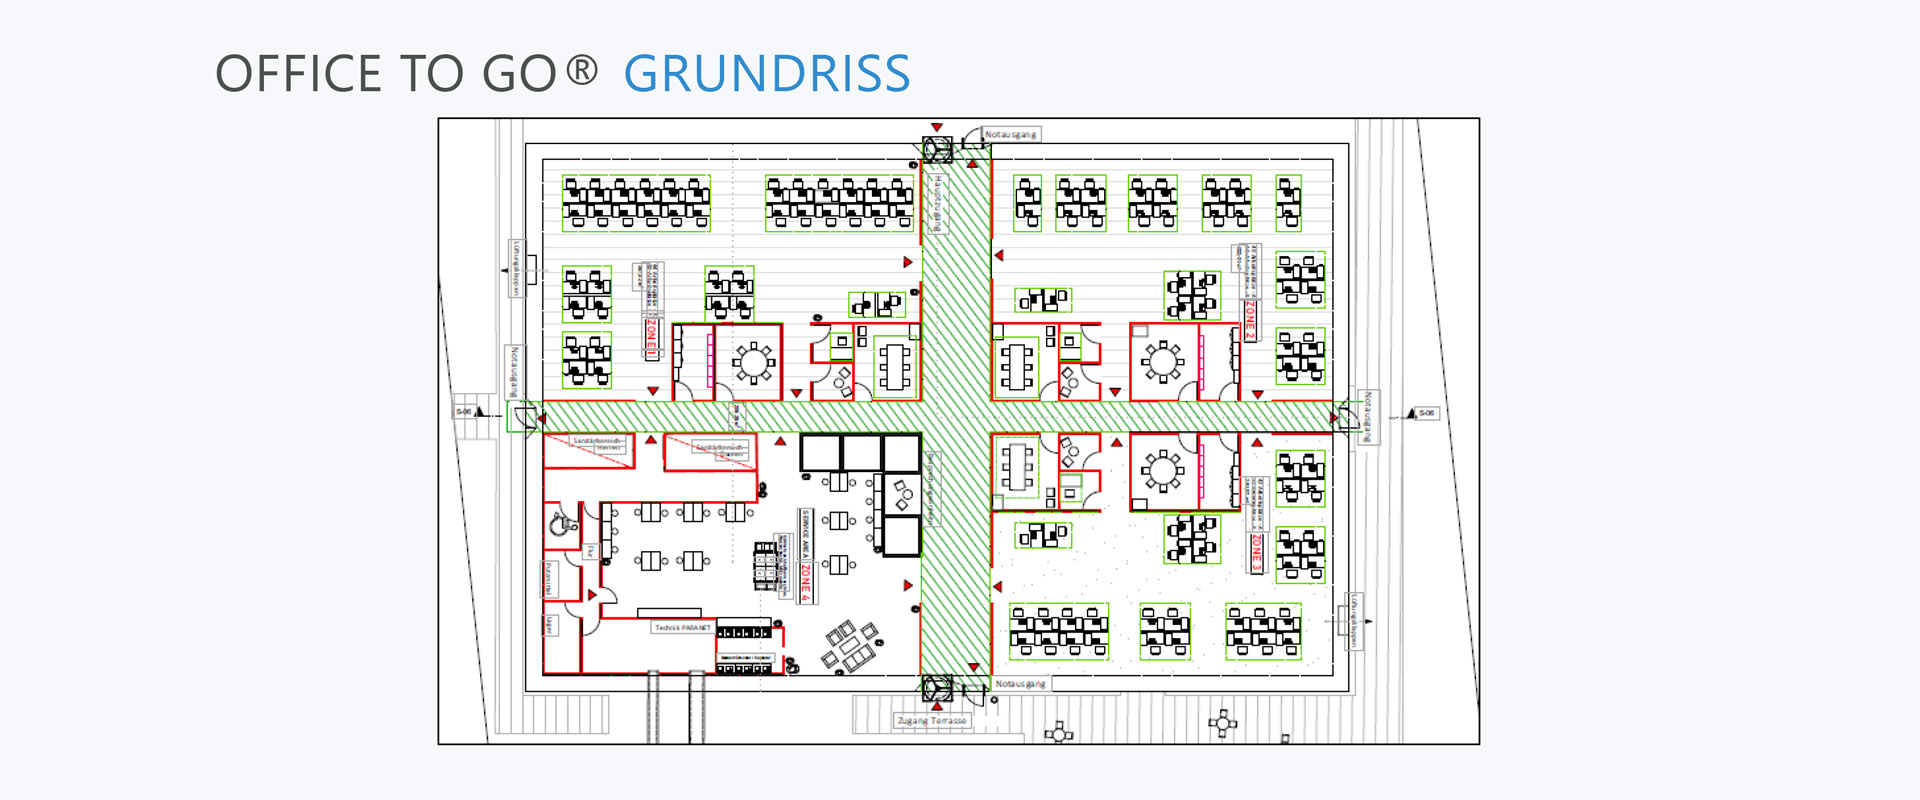 Office to go Grundriss